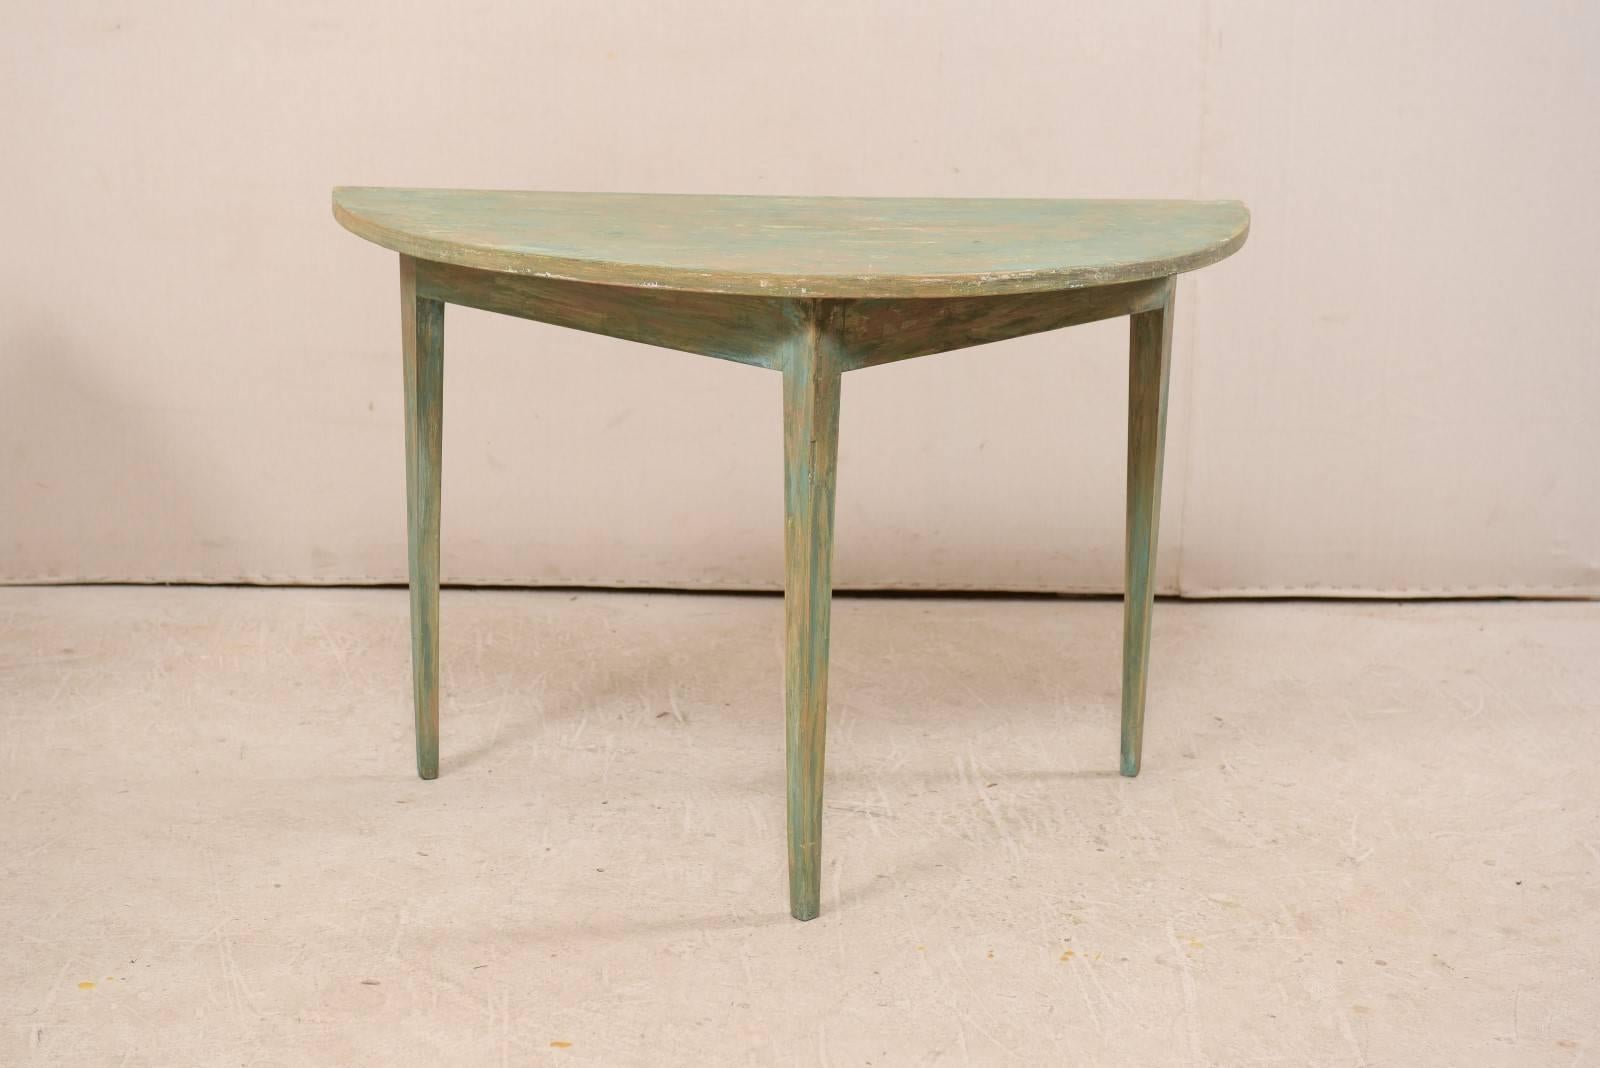 Pair of Swedish 19th Century Painted Wood Demilune Tables with Tapered Legs 5